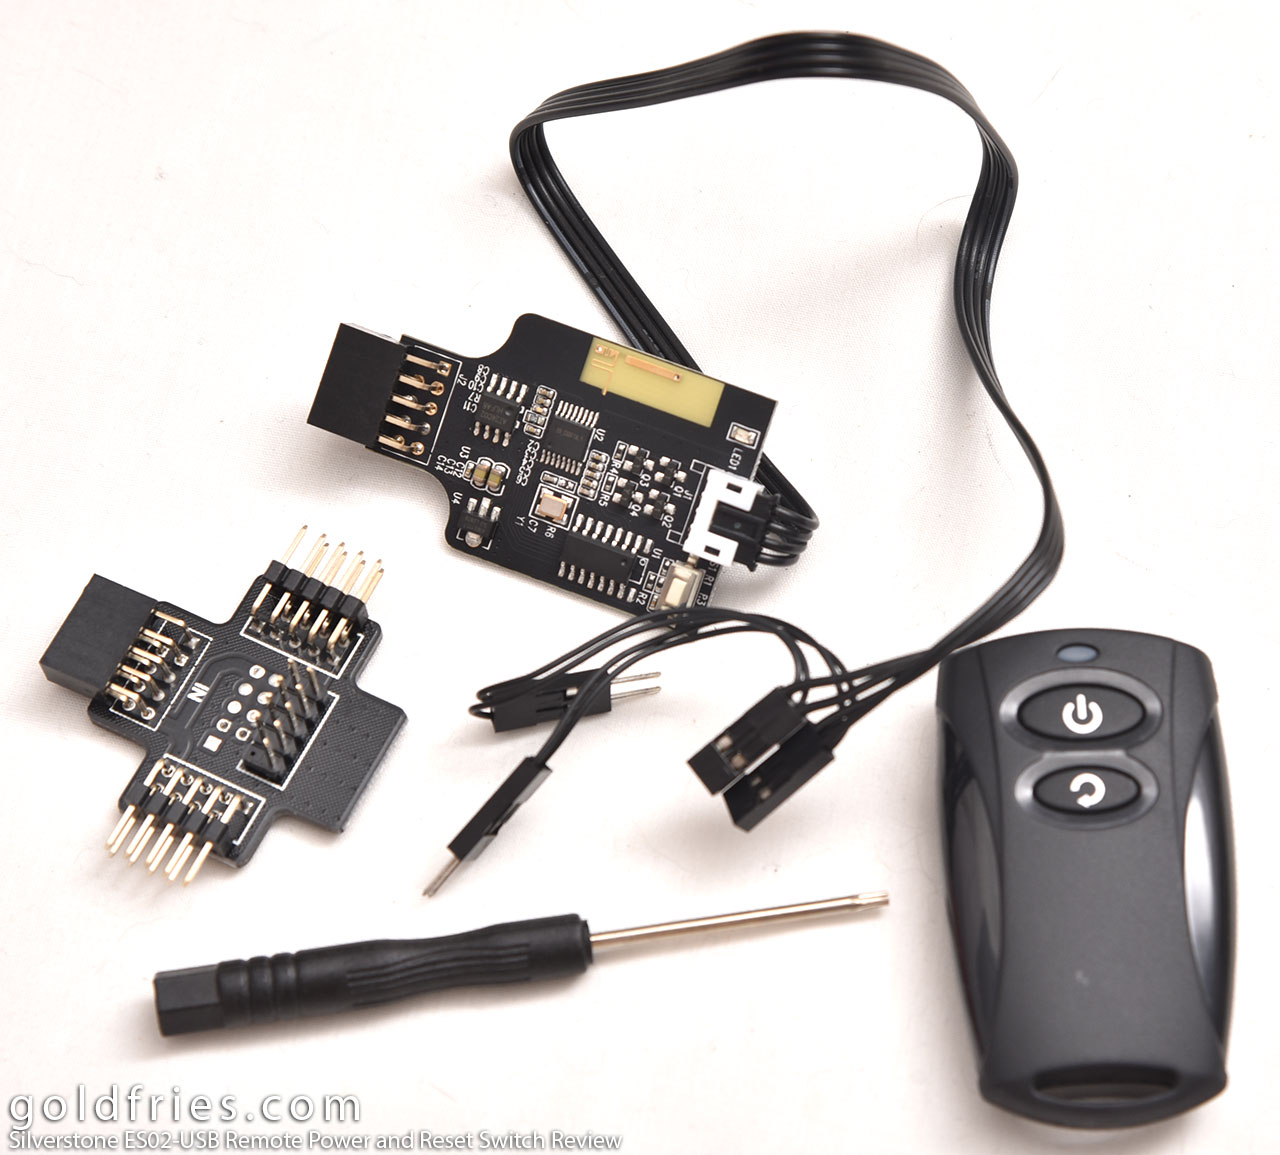 Silverstone ES02-USB Remote Power and Reset Switch Review